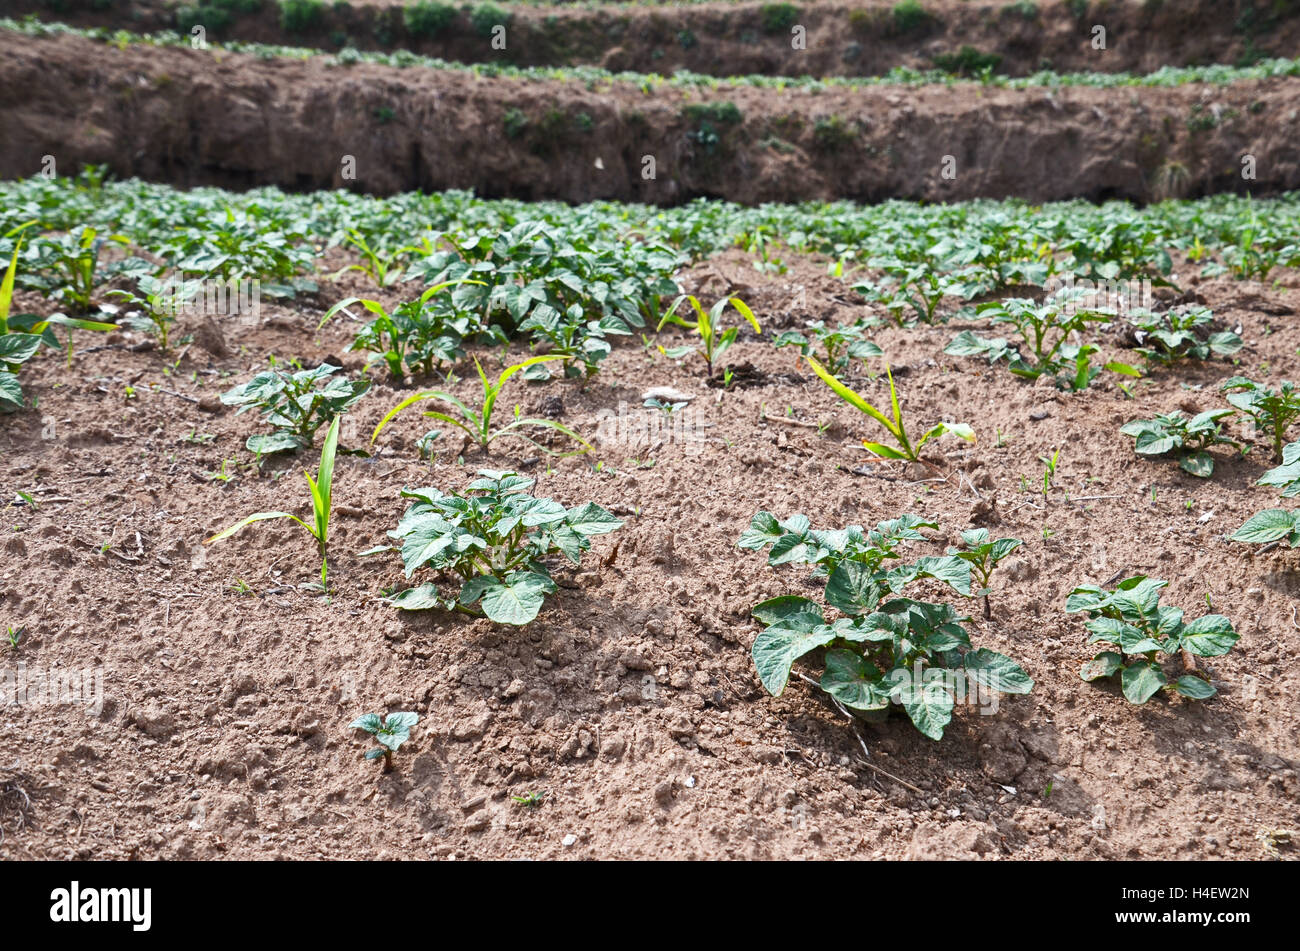 Young potato and corn plants in a terraced field near the village of Nele, Solukhumbu, Nepal Stock Photo